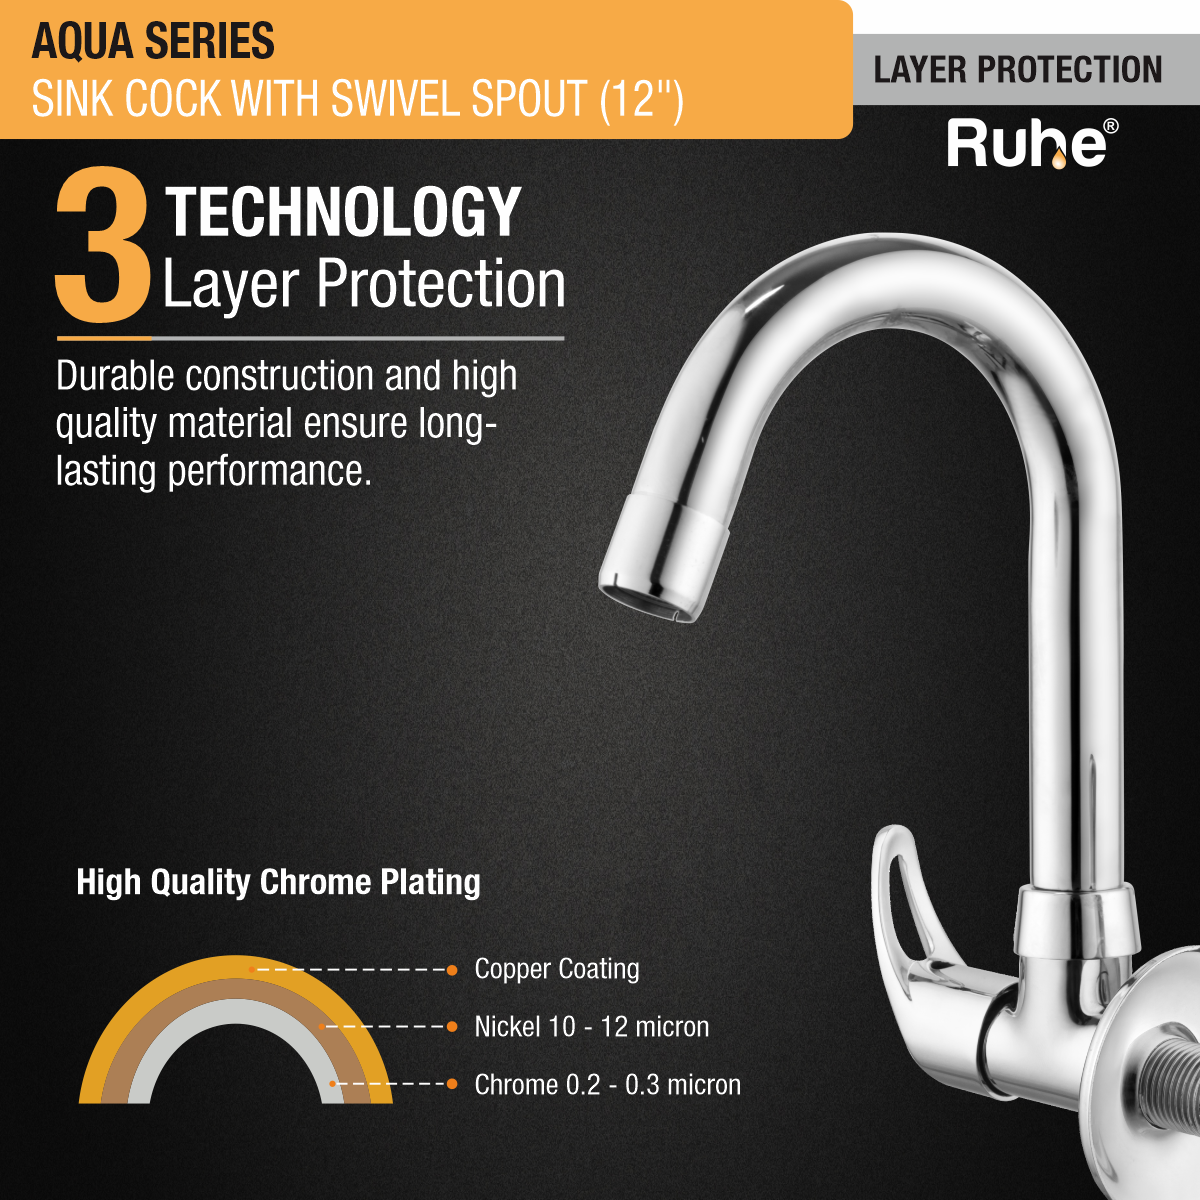 Aqua Sink Tap with Small (12 inches) Round Swivel Spout Faucet 3 layer protection